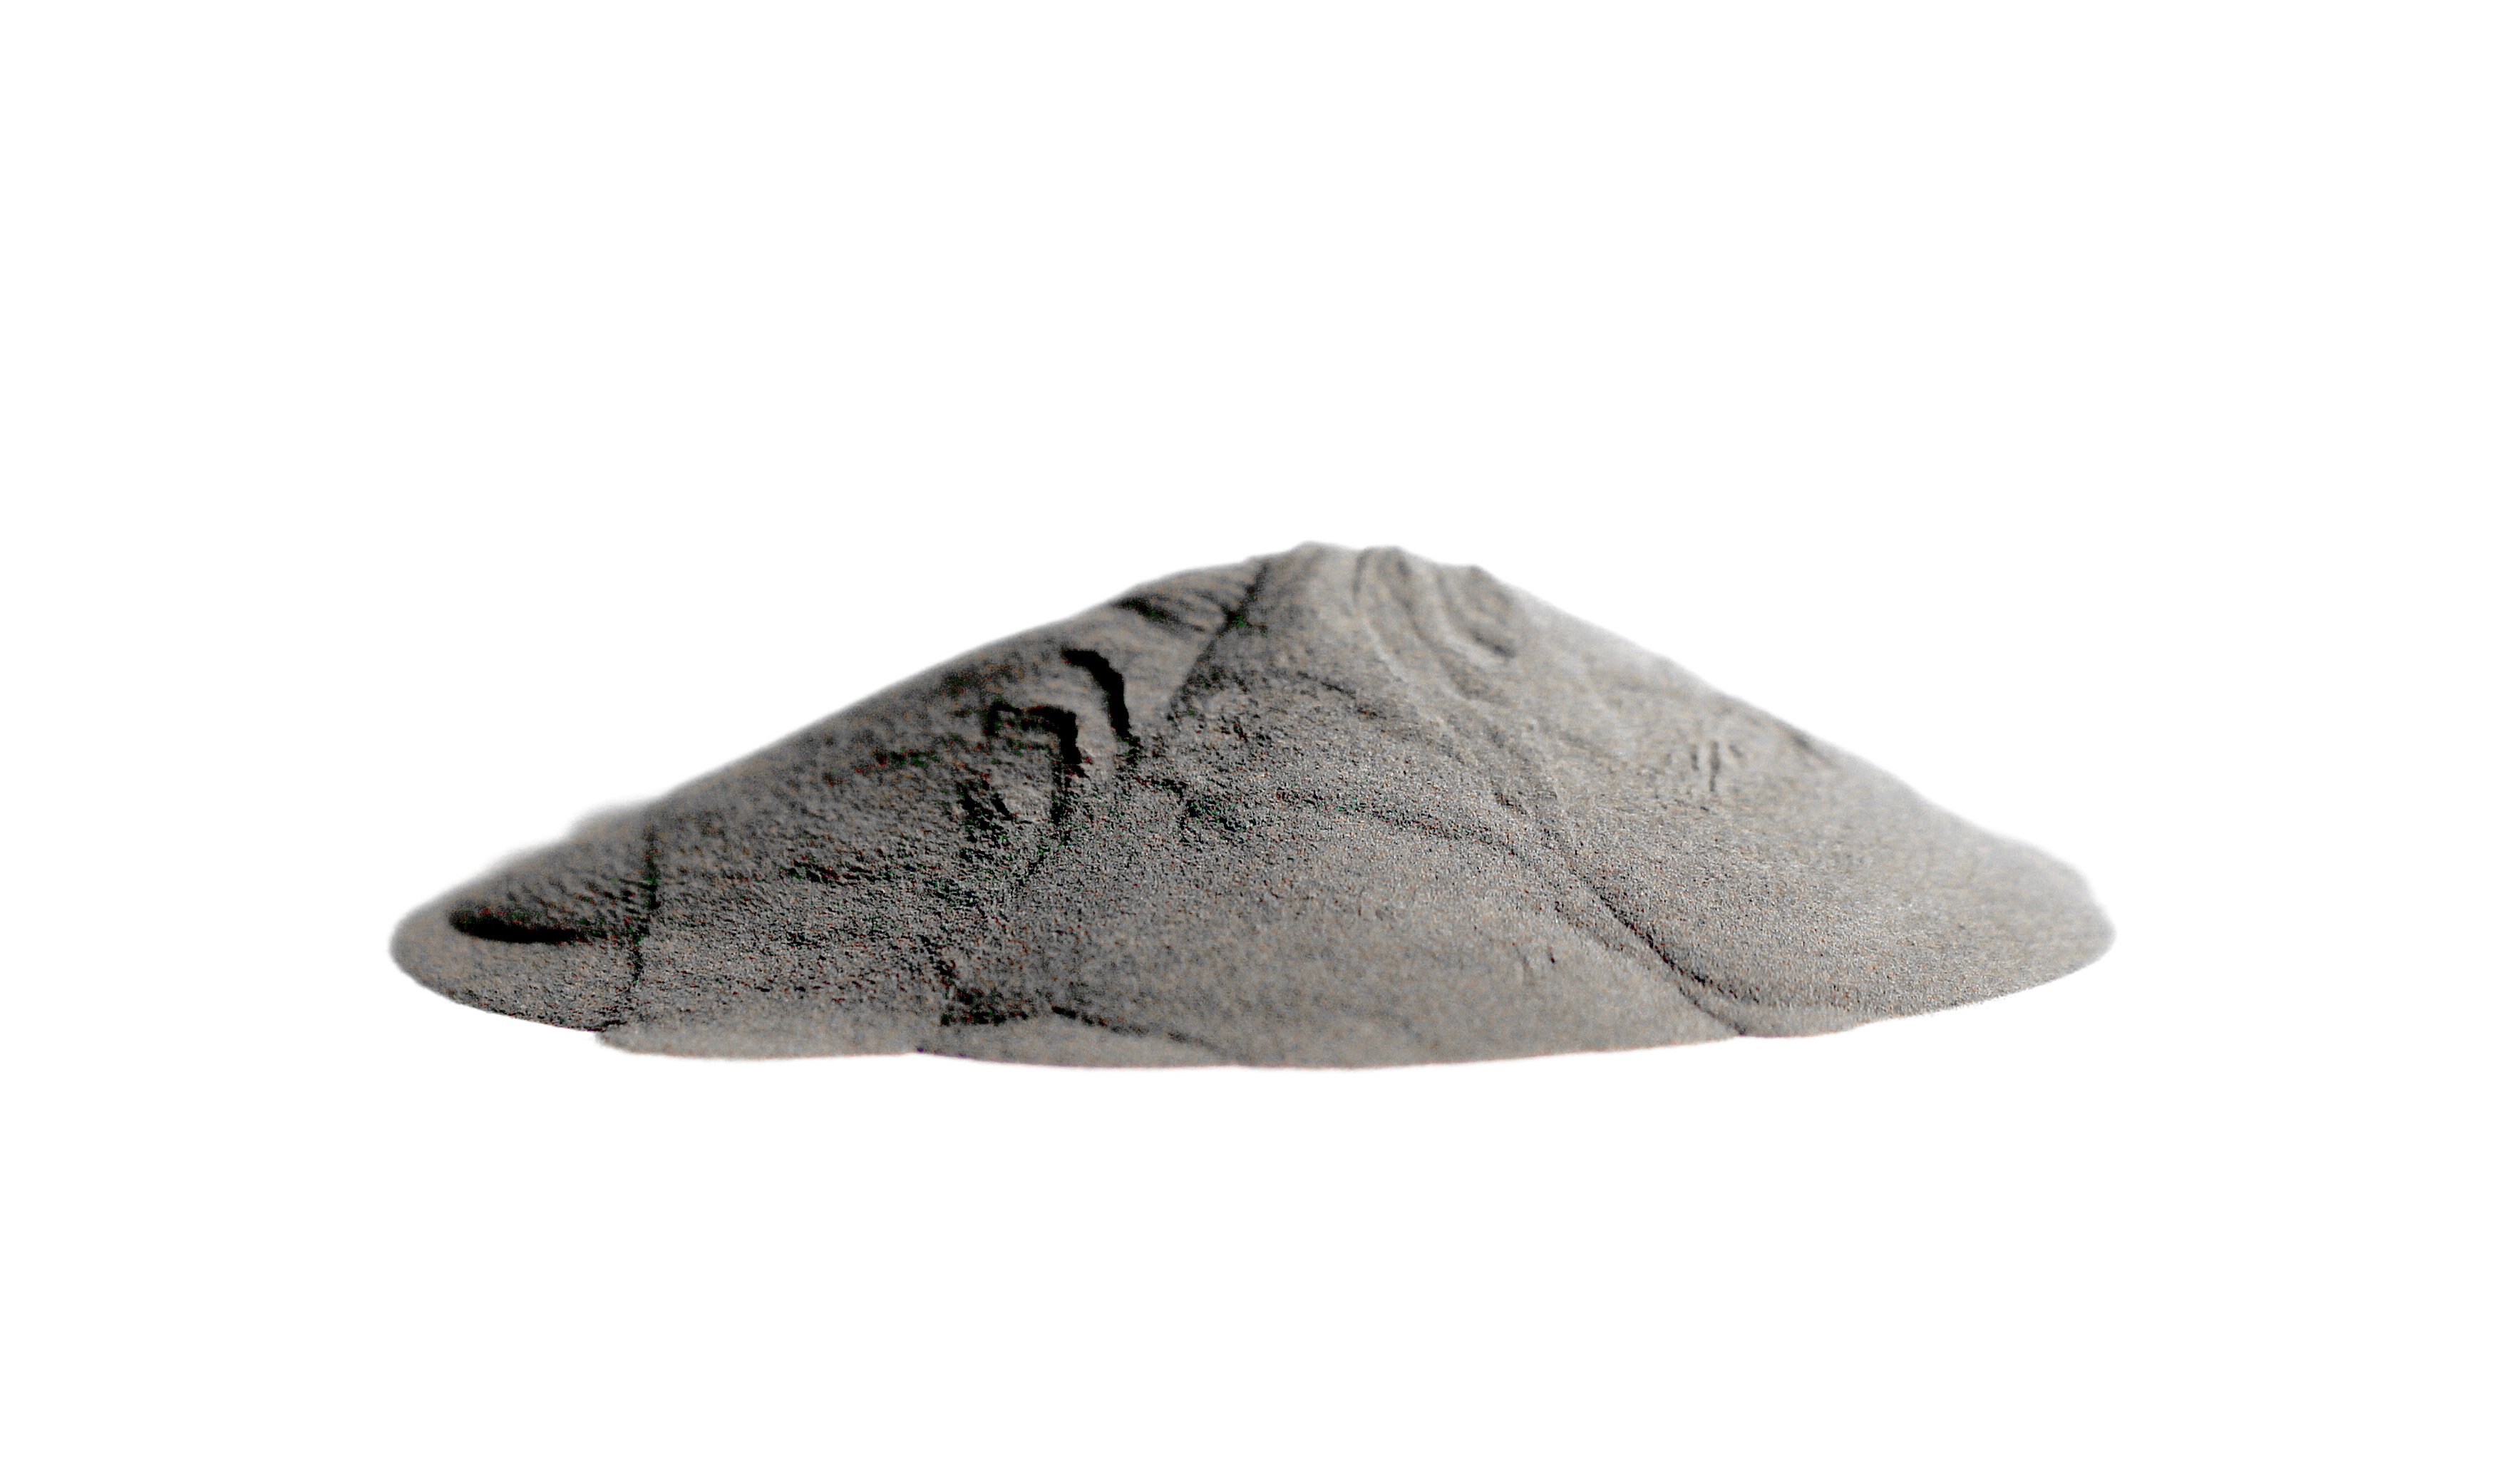 Cooksongold's Pt/Ru alloy has been specifically developed for 3D printing.